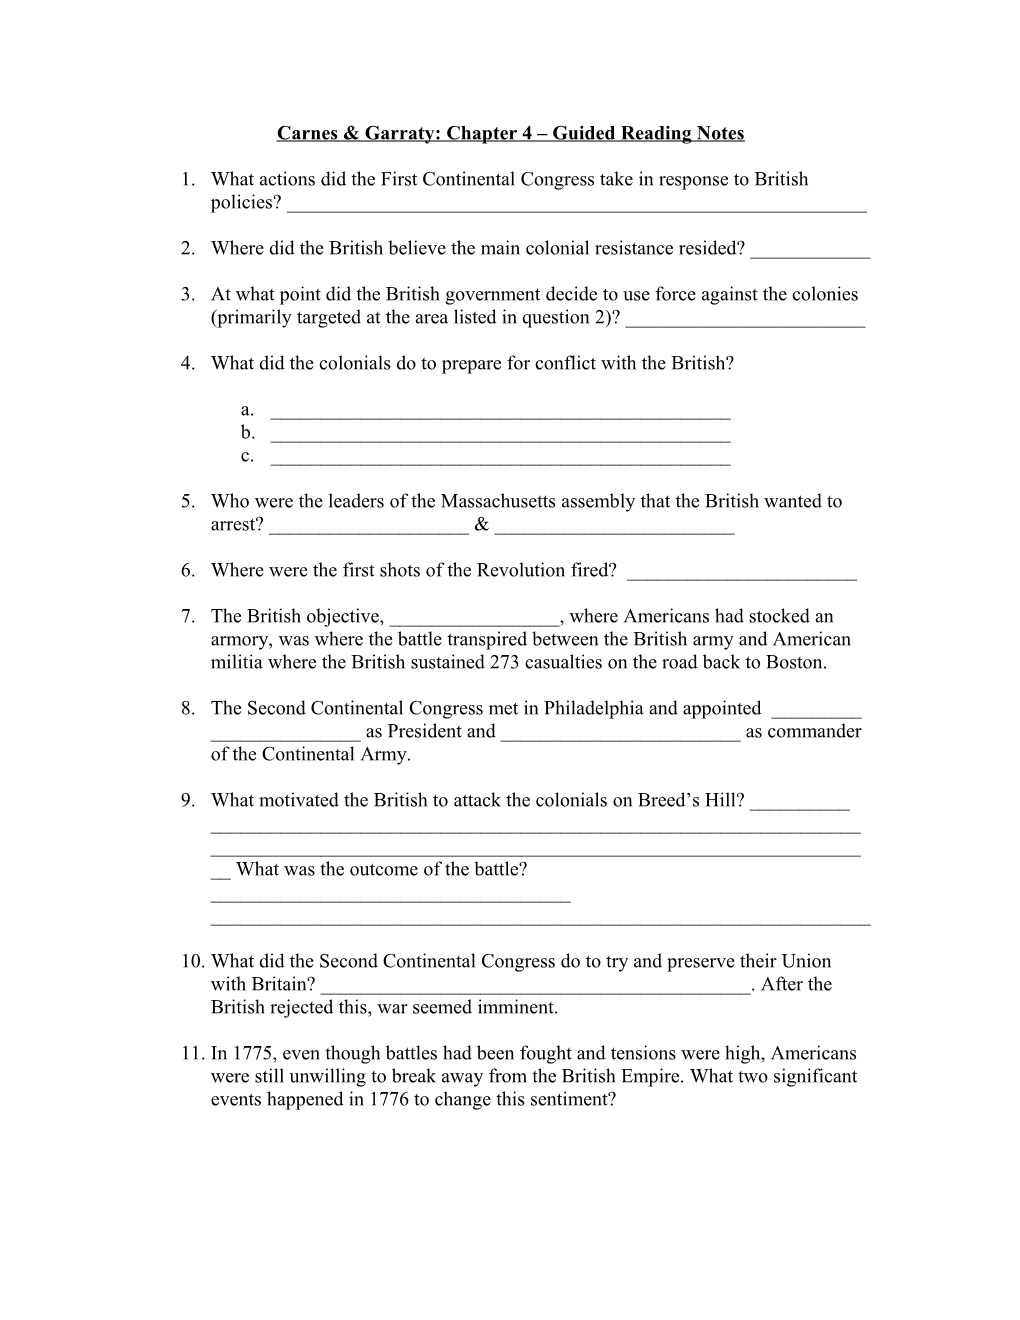 Carnes & Garraty: Chapter 4 Guided Reading Notes